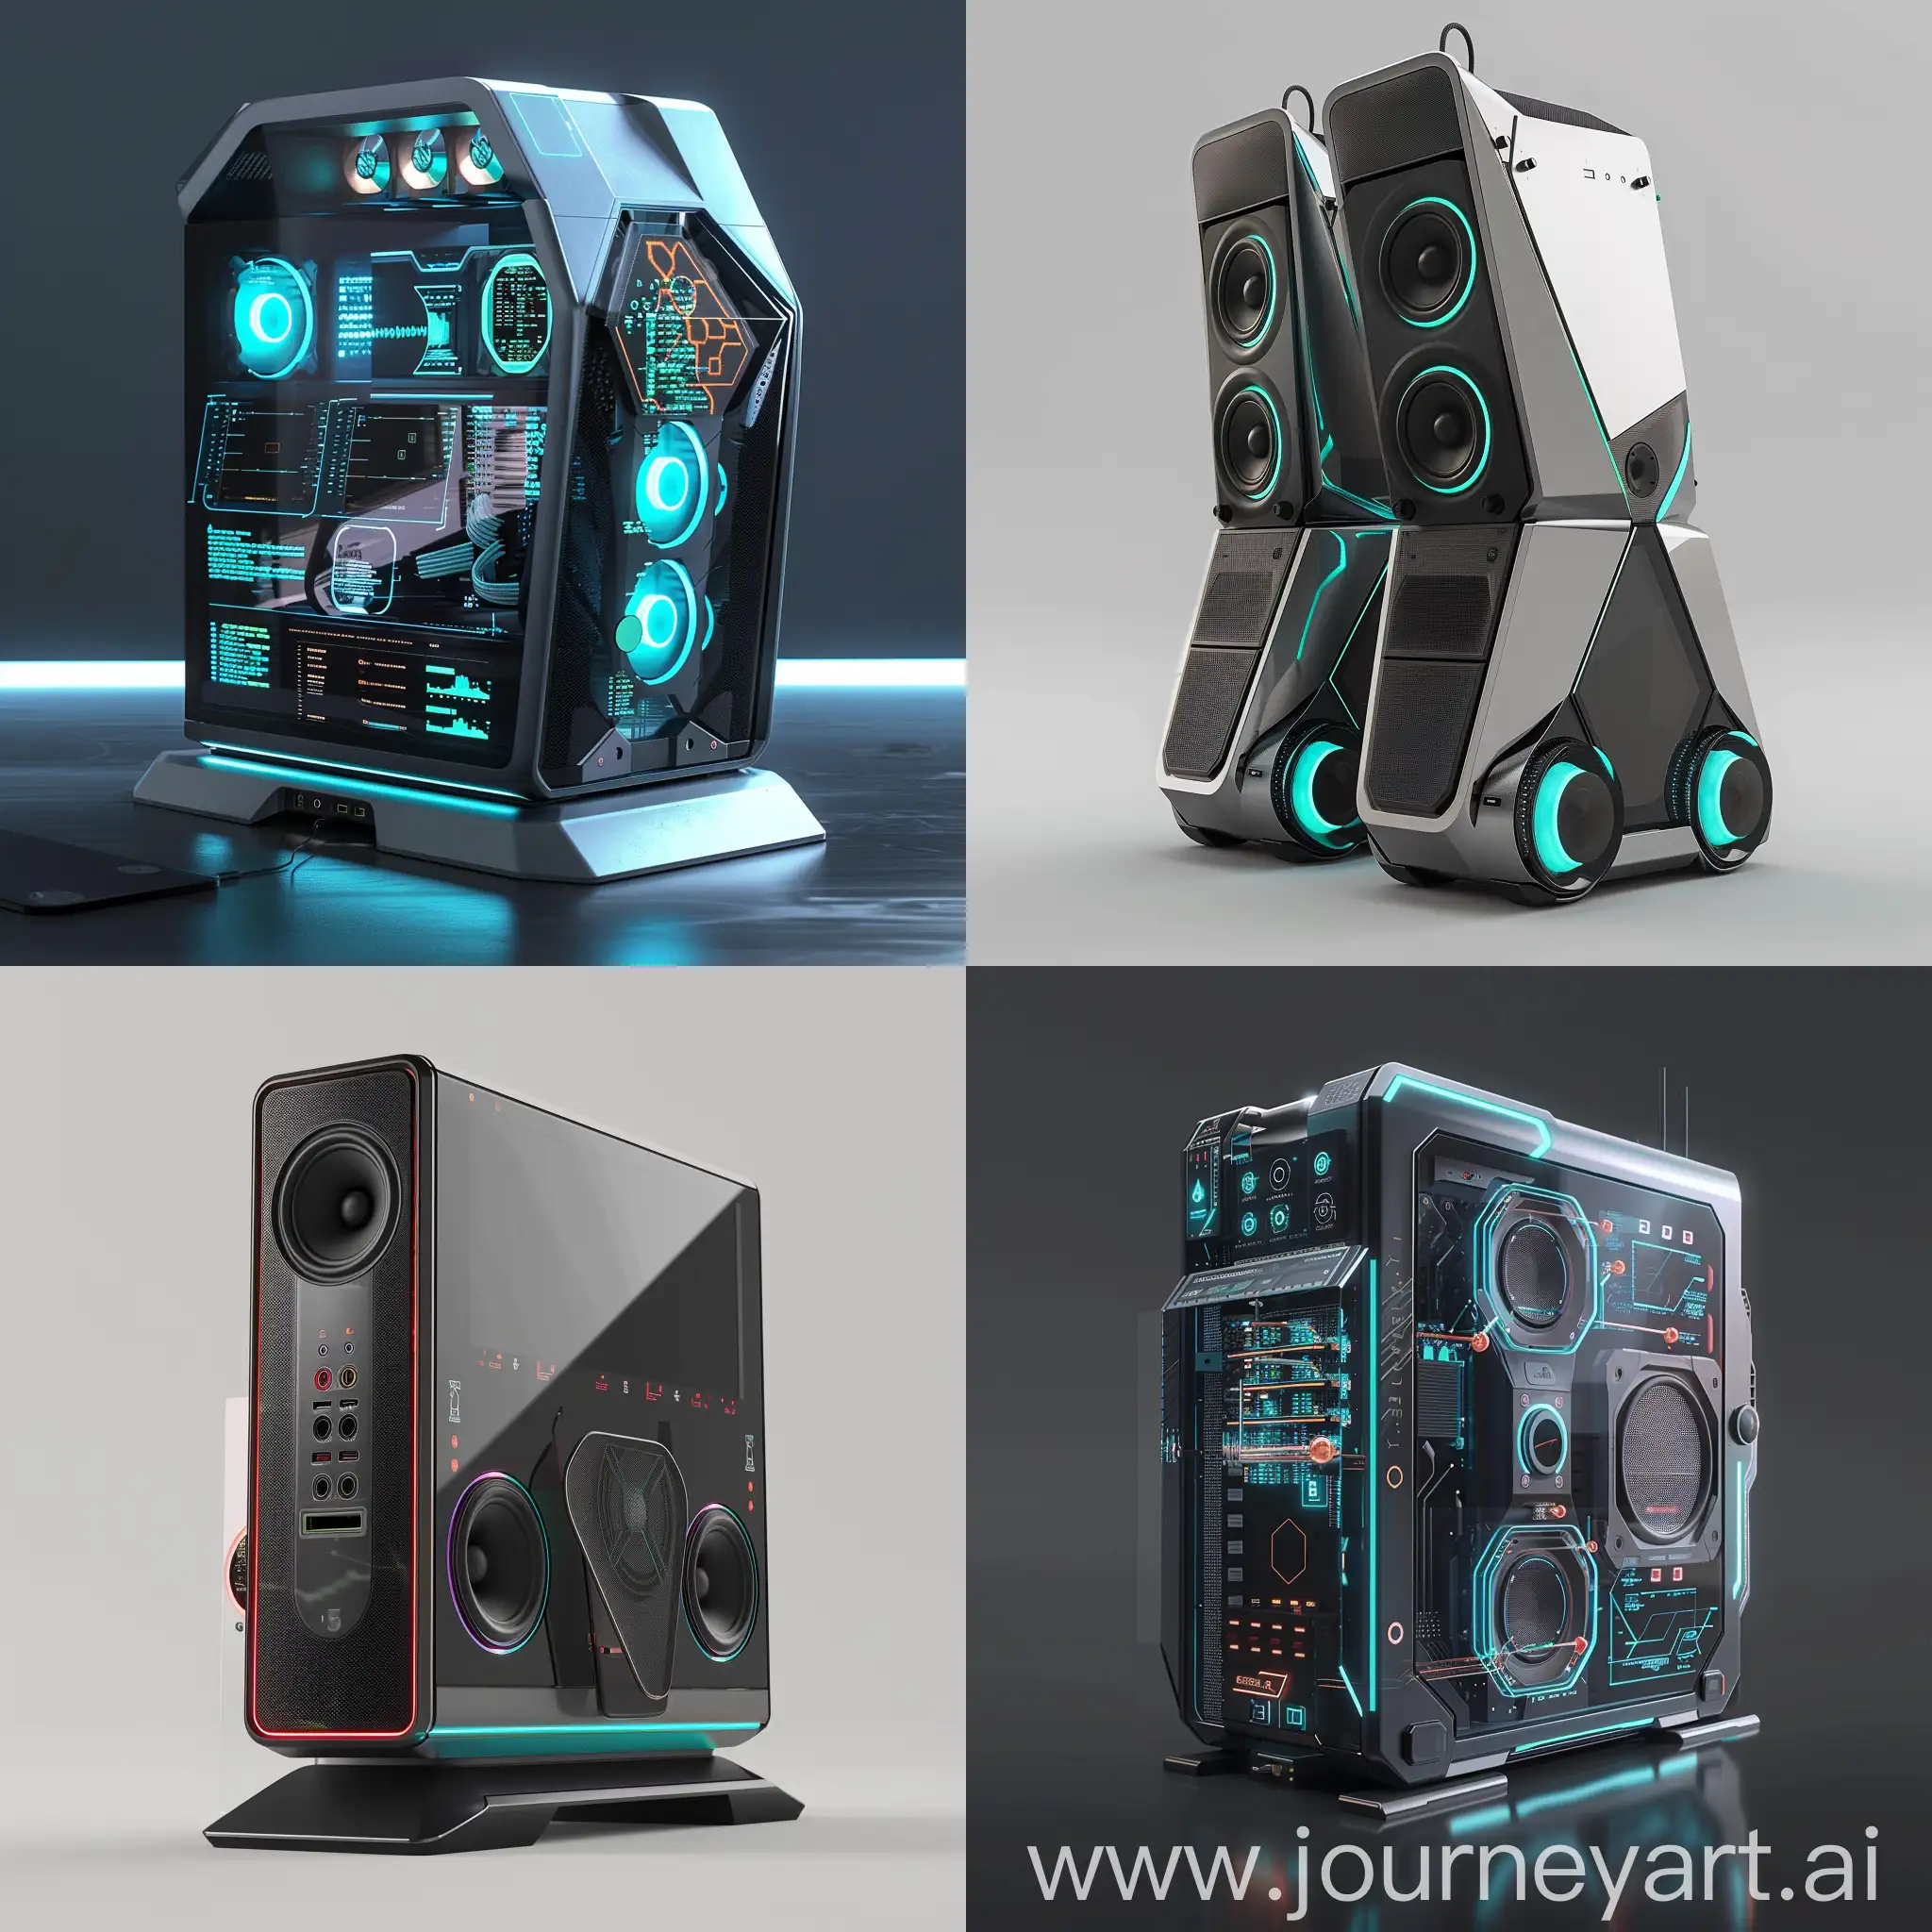 Futuristic PC speakers, Minimalist Aesthetics, Interactive Touch Panels, Transparent OLED Displays, 360-Degree Sound Projection, Integrated Voice Assistants, Wireless Charging Pads, Customizable RGB Lighting, Biometric Security Features, Augmented Reality Projectors, Self-Healing Coatings, Carbon Fiber Enclosures, Neodymium Magnet Drivers, Graphene Diaphragms, Aluminum Voice Coils, Kevlar Reinforced Speaker Cones, Liquid Cooling Systems, Titanium Tweeters, Rubberized Shock Absorbers, Copper-Clad Aluminum Voice Coils, IPX-rated Enclosures, Carbon Fiber Housing, Magnesium Alloy Grilles, Shockproof Rubberized Bumpers, Aircraft-Grade Aluminum Frames, High-Grade Plastic Trim, Reinforced Corner Protectors, Nanocoating Technology, Foldable Design, Military-Grade Durability Standards, Integrated Carrying Handles, unreal engine 5 --stylize 1000